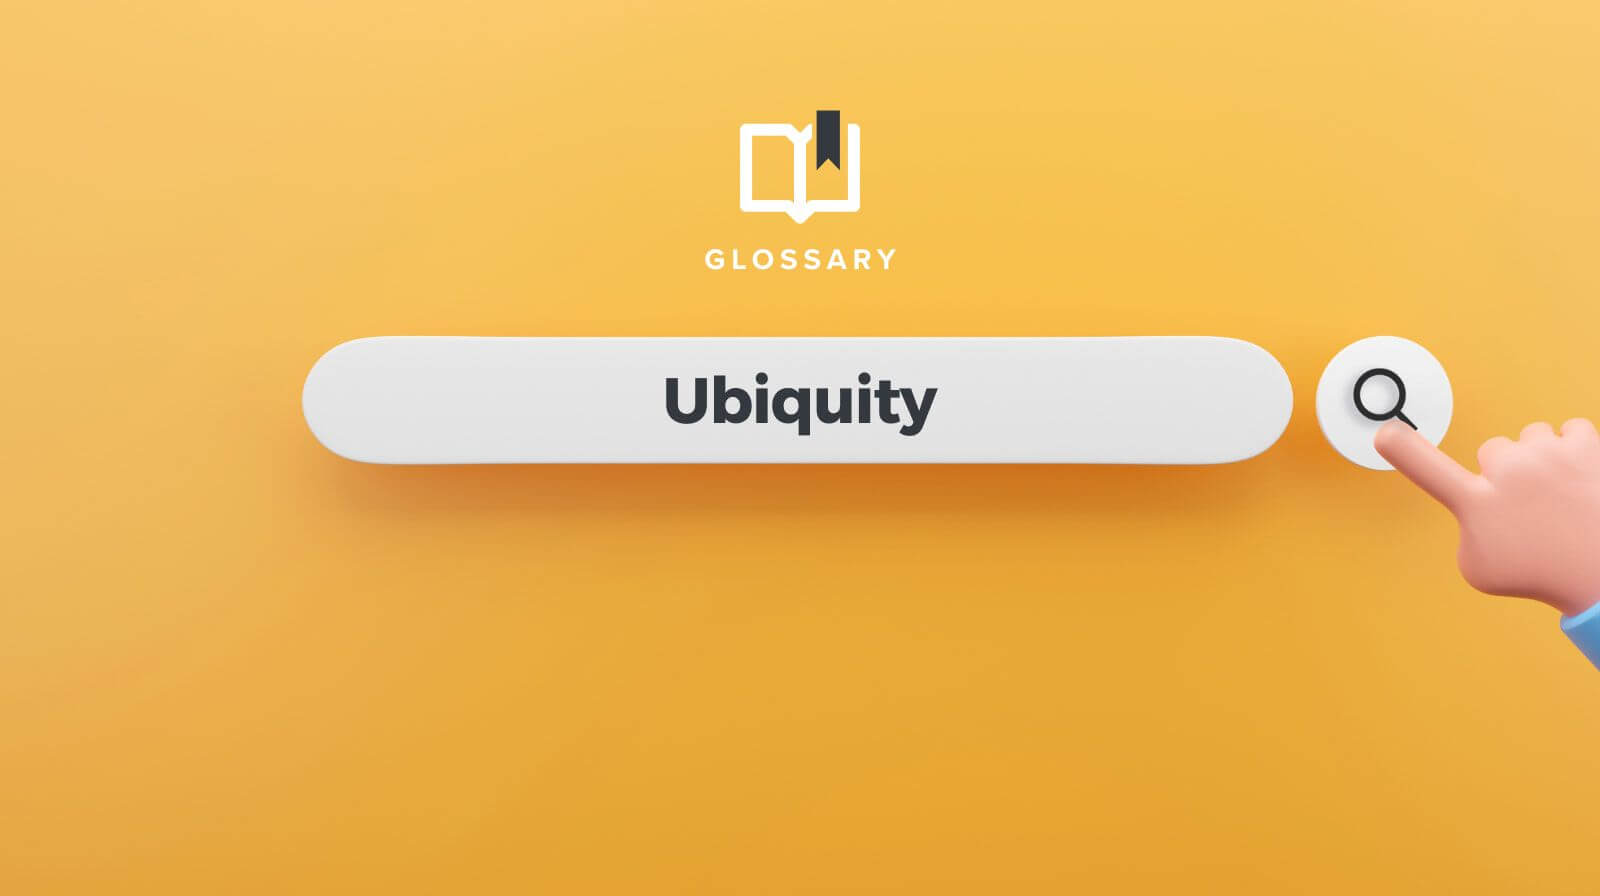 What is Ubiquity?